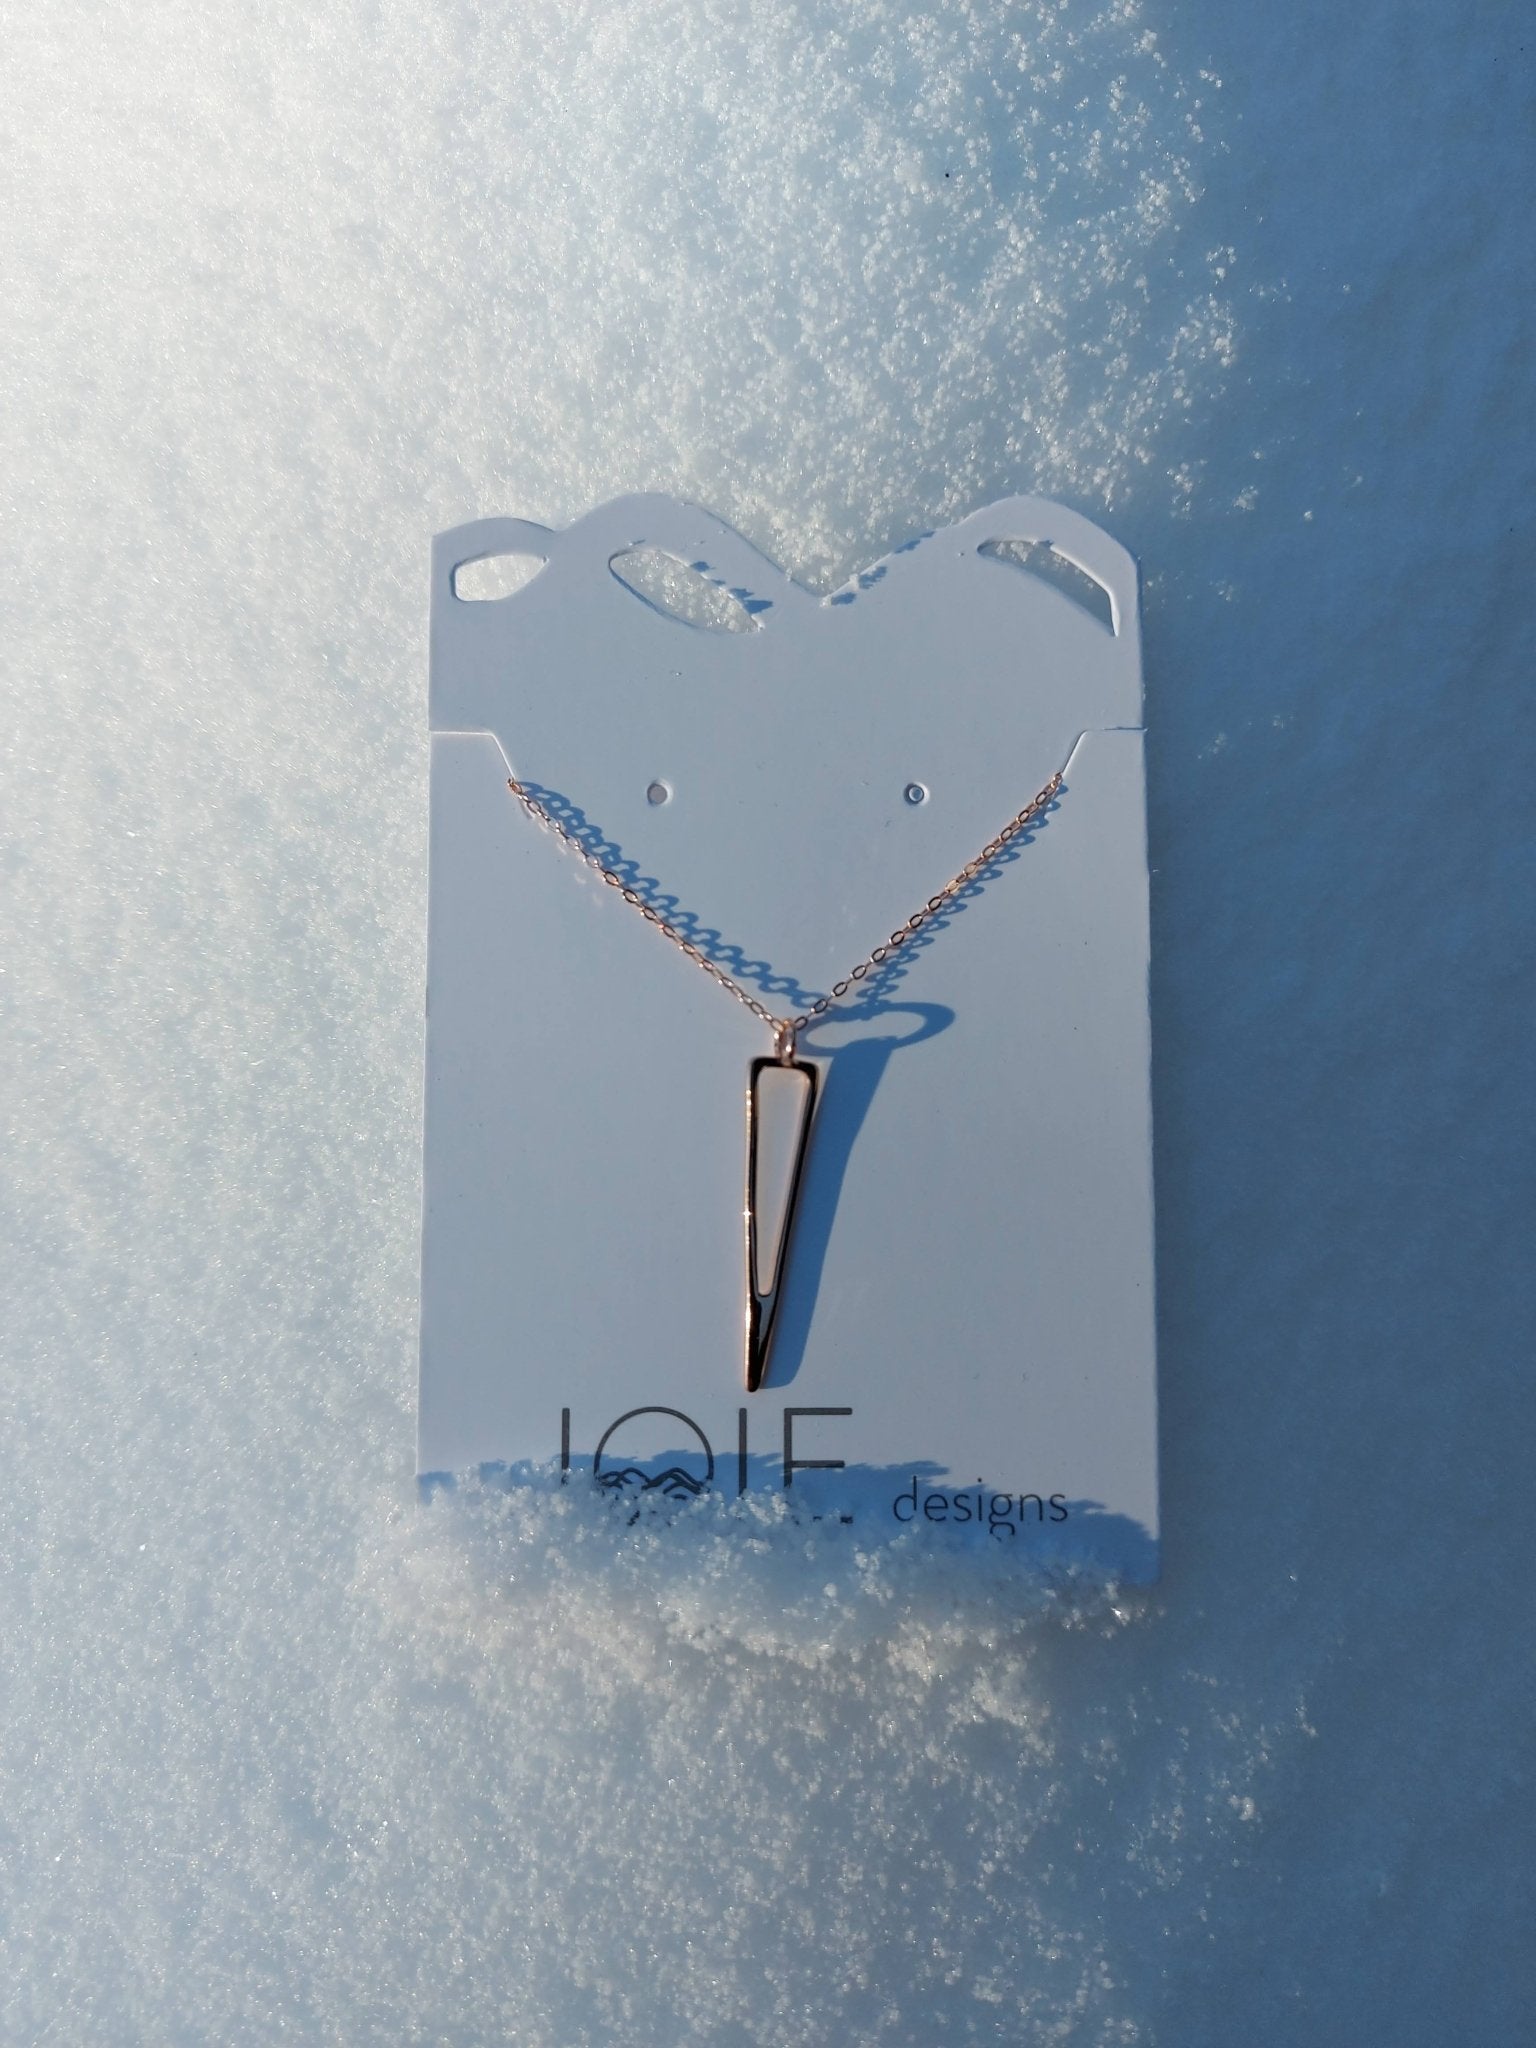 18k rose gold plated icicle design pendant necklace showcased on a jewellery card with fresh snow background